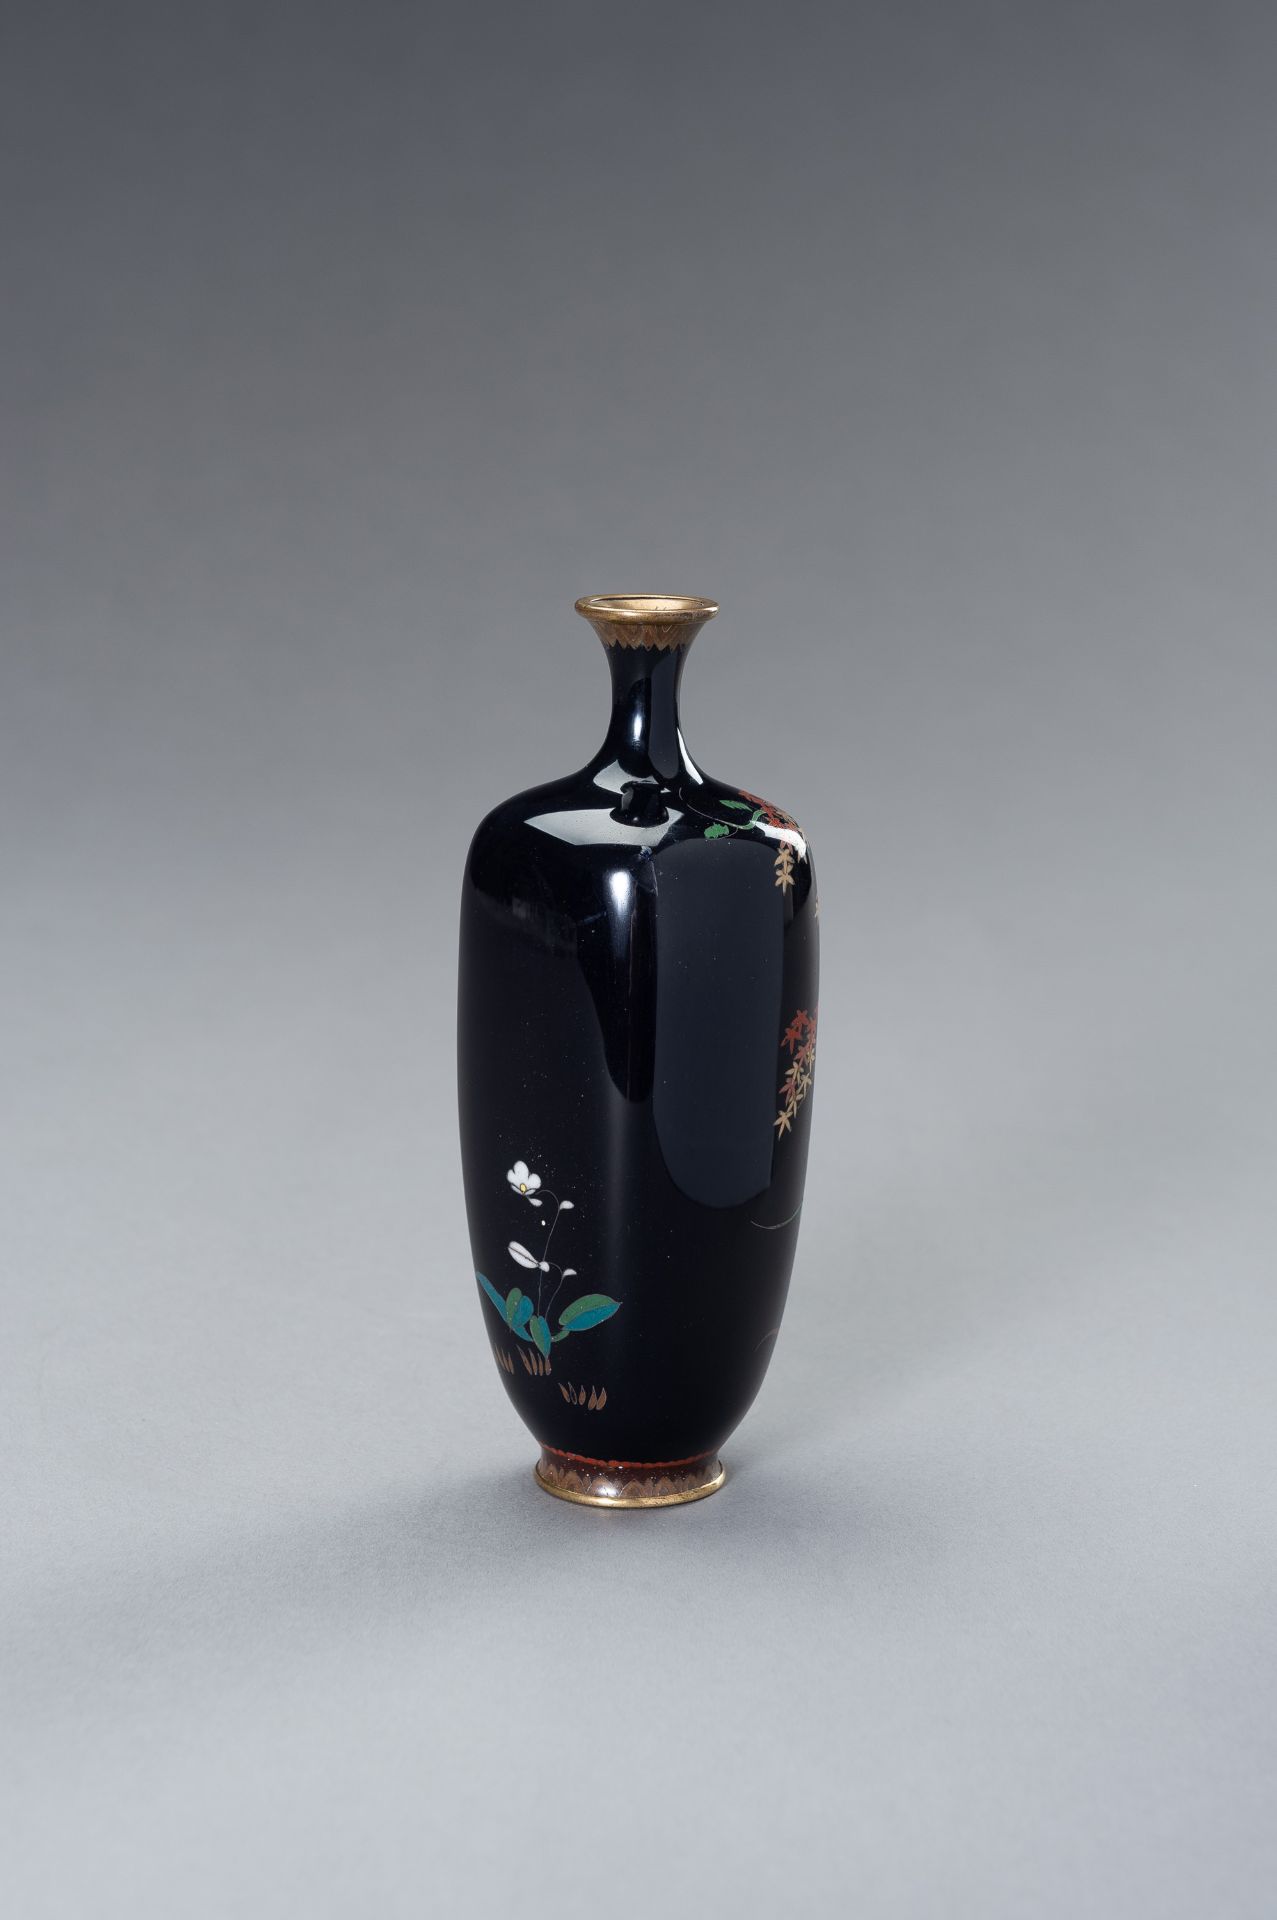 A CLOISONNE VASE WITH A MAPLE TREE AND FLOWERS - Image 4 of 10